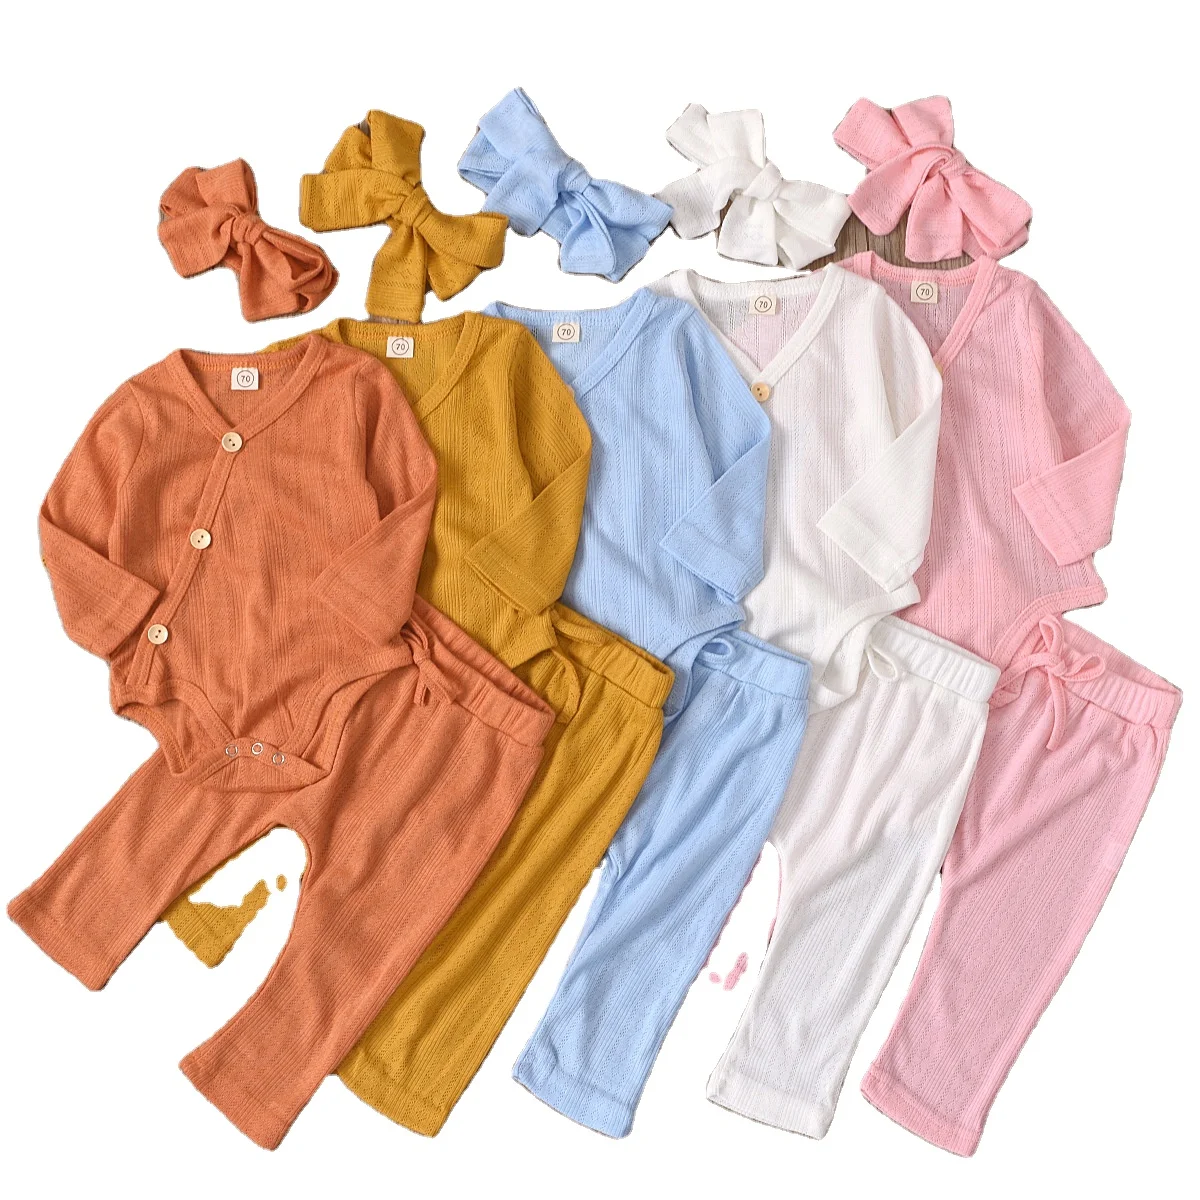 

Breathable baby girls' and boy's rompers infants cotton clothing sets toddlers jumpsuits, pants and headband